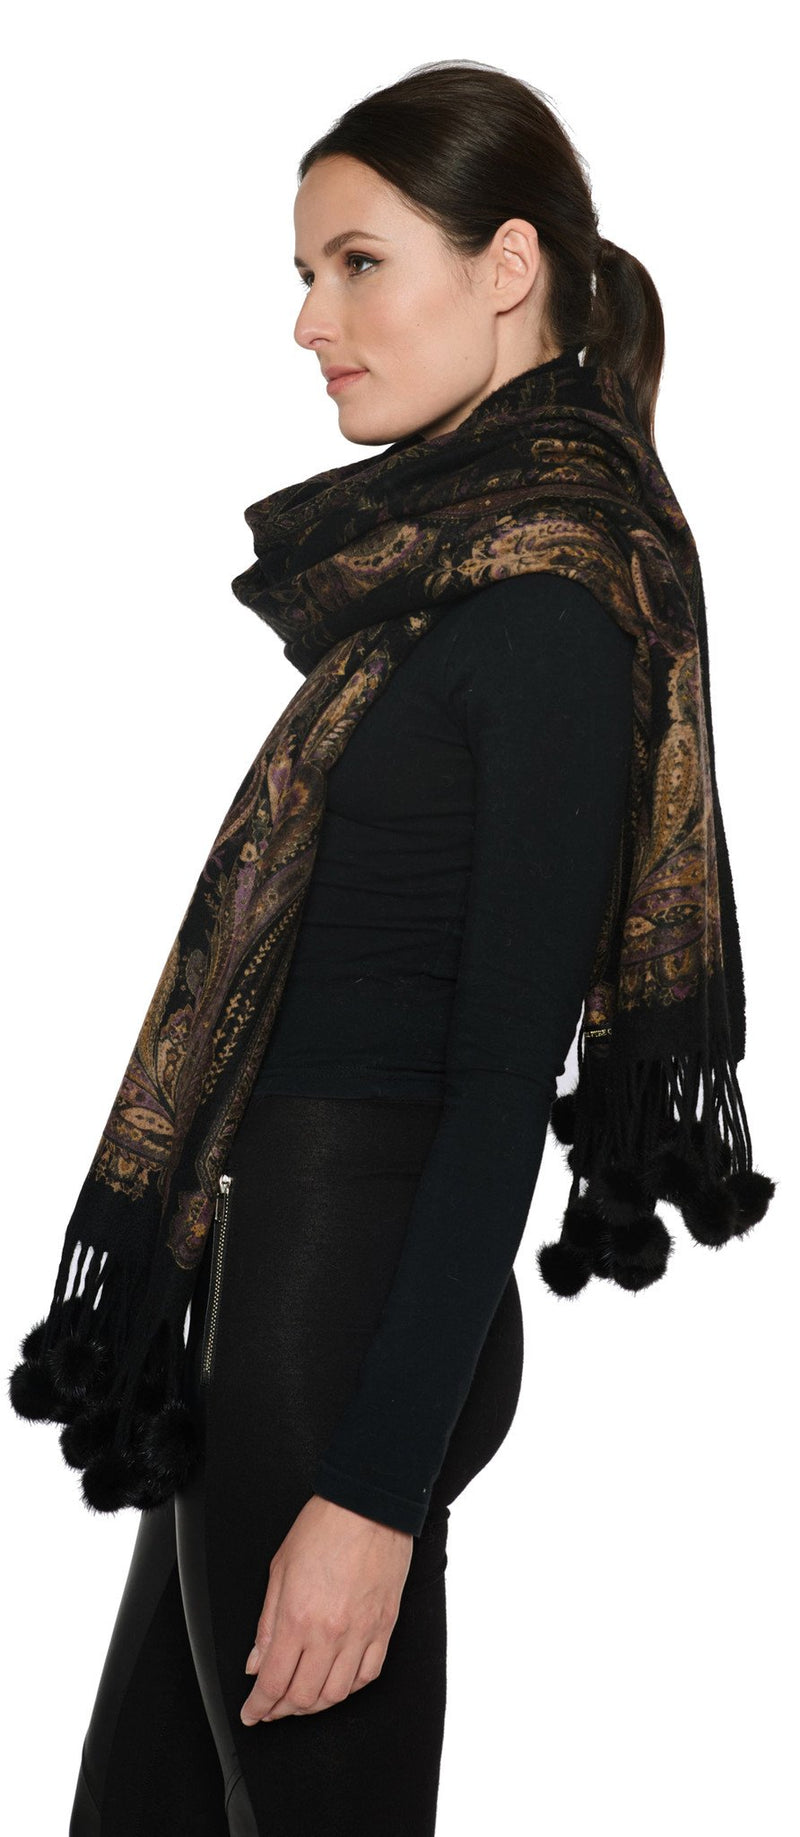 THE RYE Cashmere Reversible Paisley Wrap with Mink Fur Poms - paulamariecollection